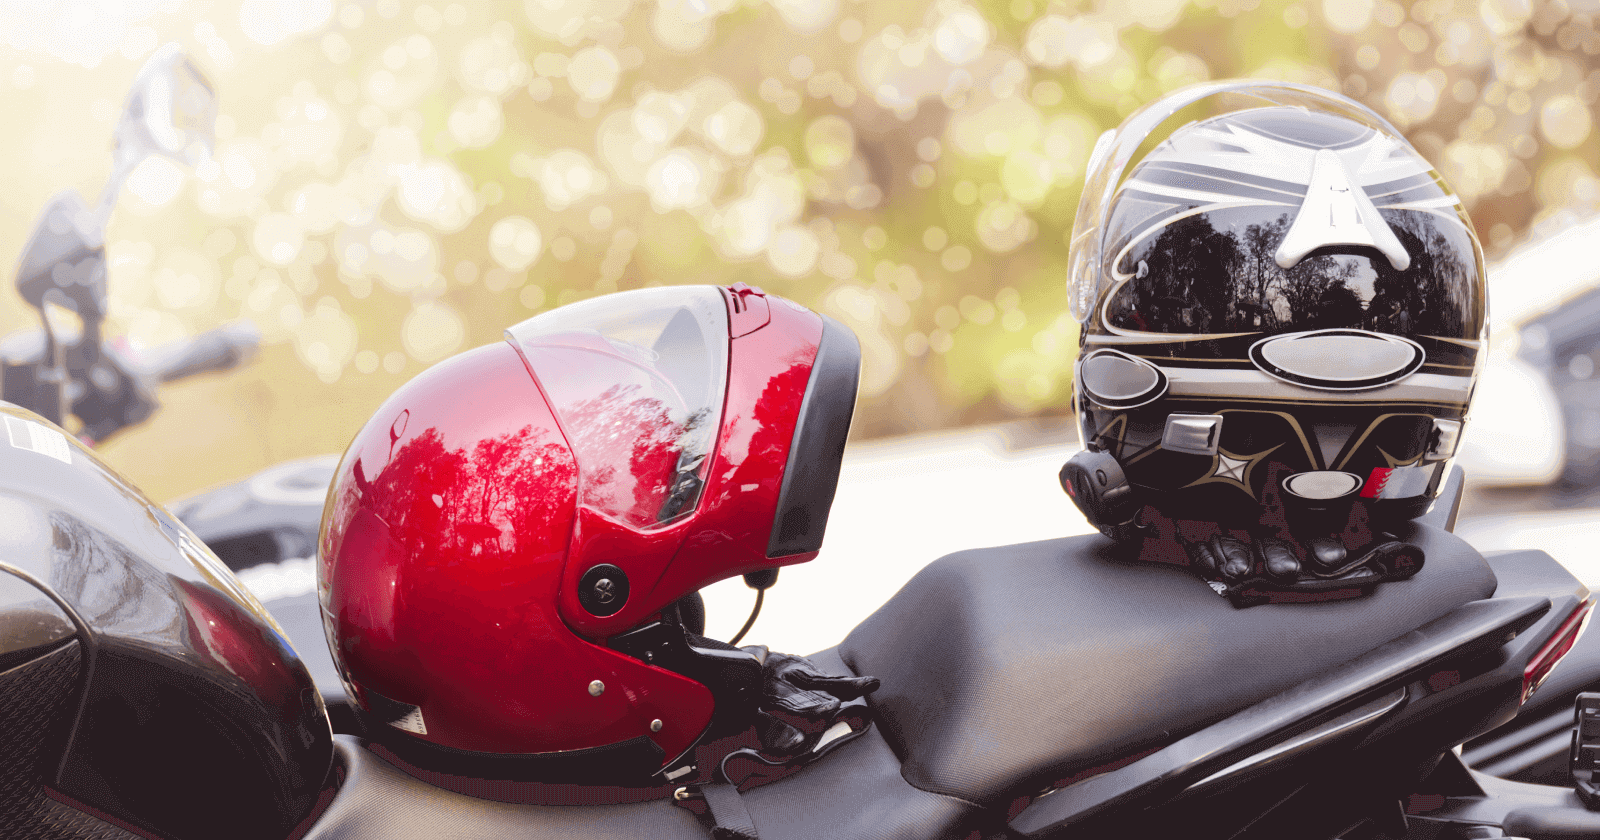 Best Motorcycle Helmets in India for Bikers in 2022 And 2023